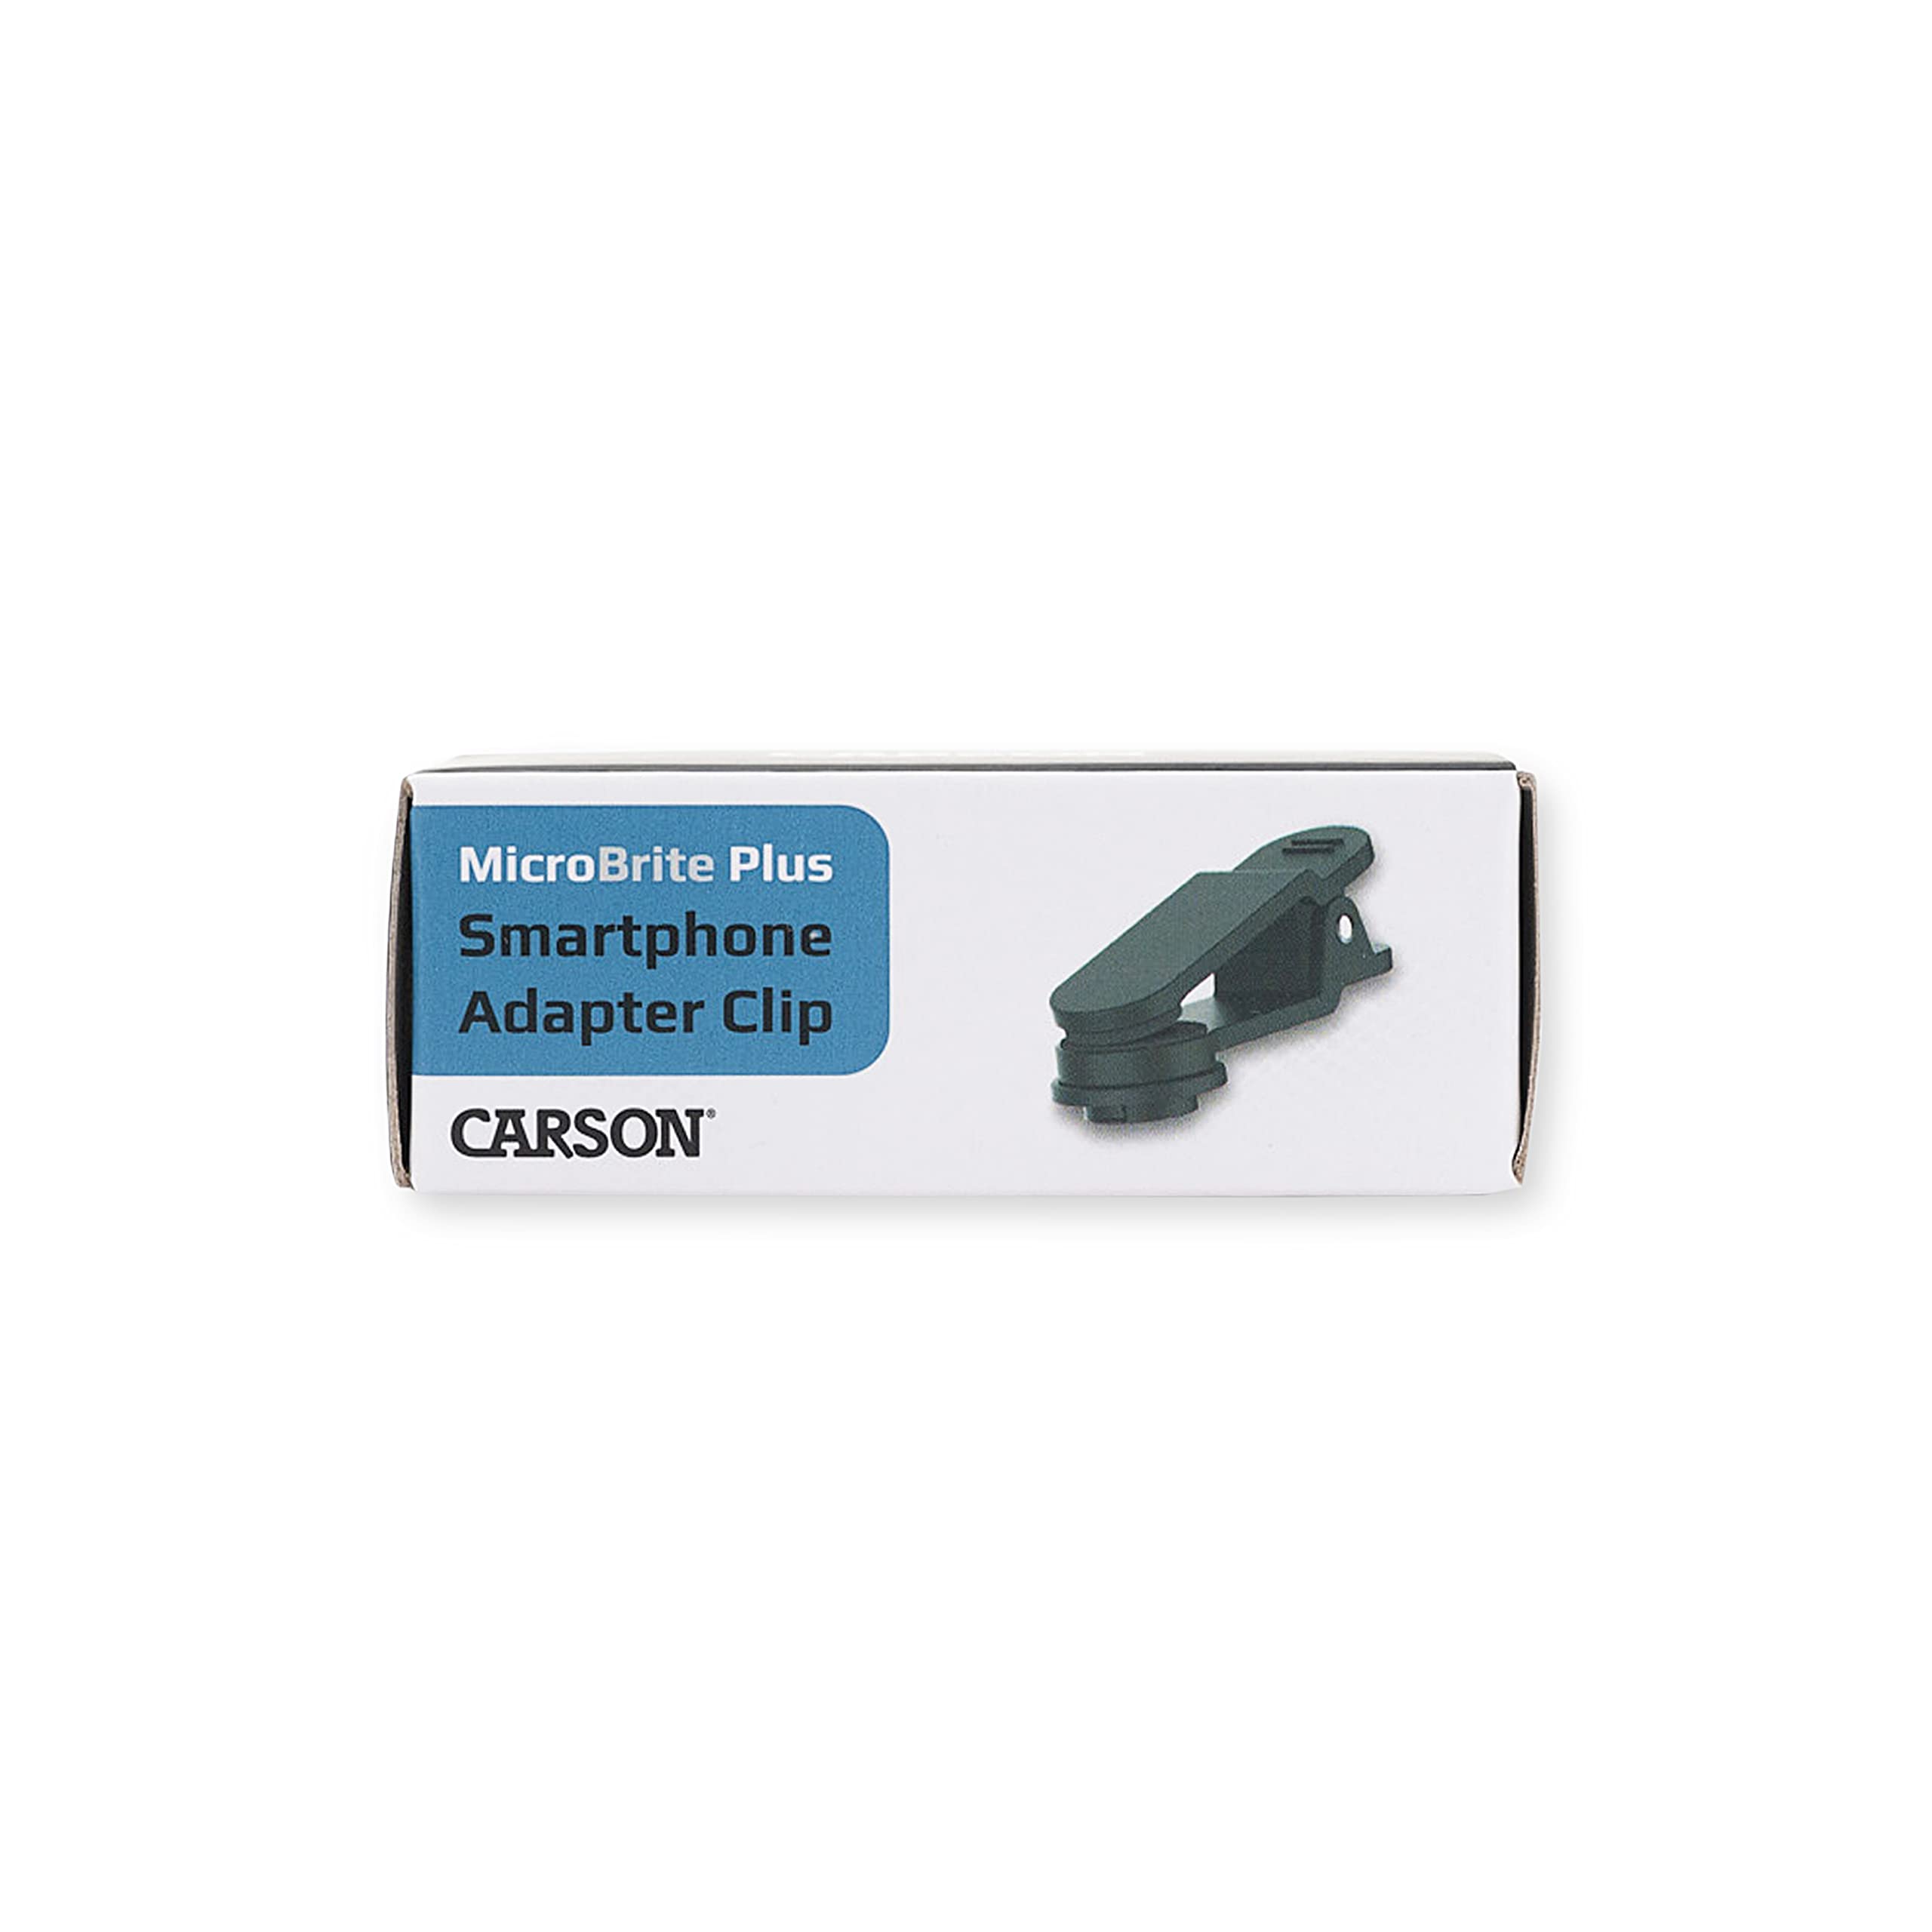 Carson Smartphone Digiscoping Adapter Clip for MicroBrite Plus 60x-120x LED Lighted Pocket Microscope for Kids and Adults (MM-310)